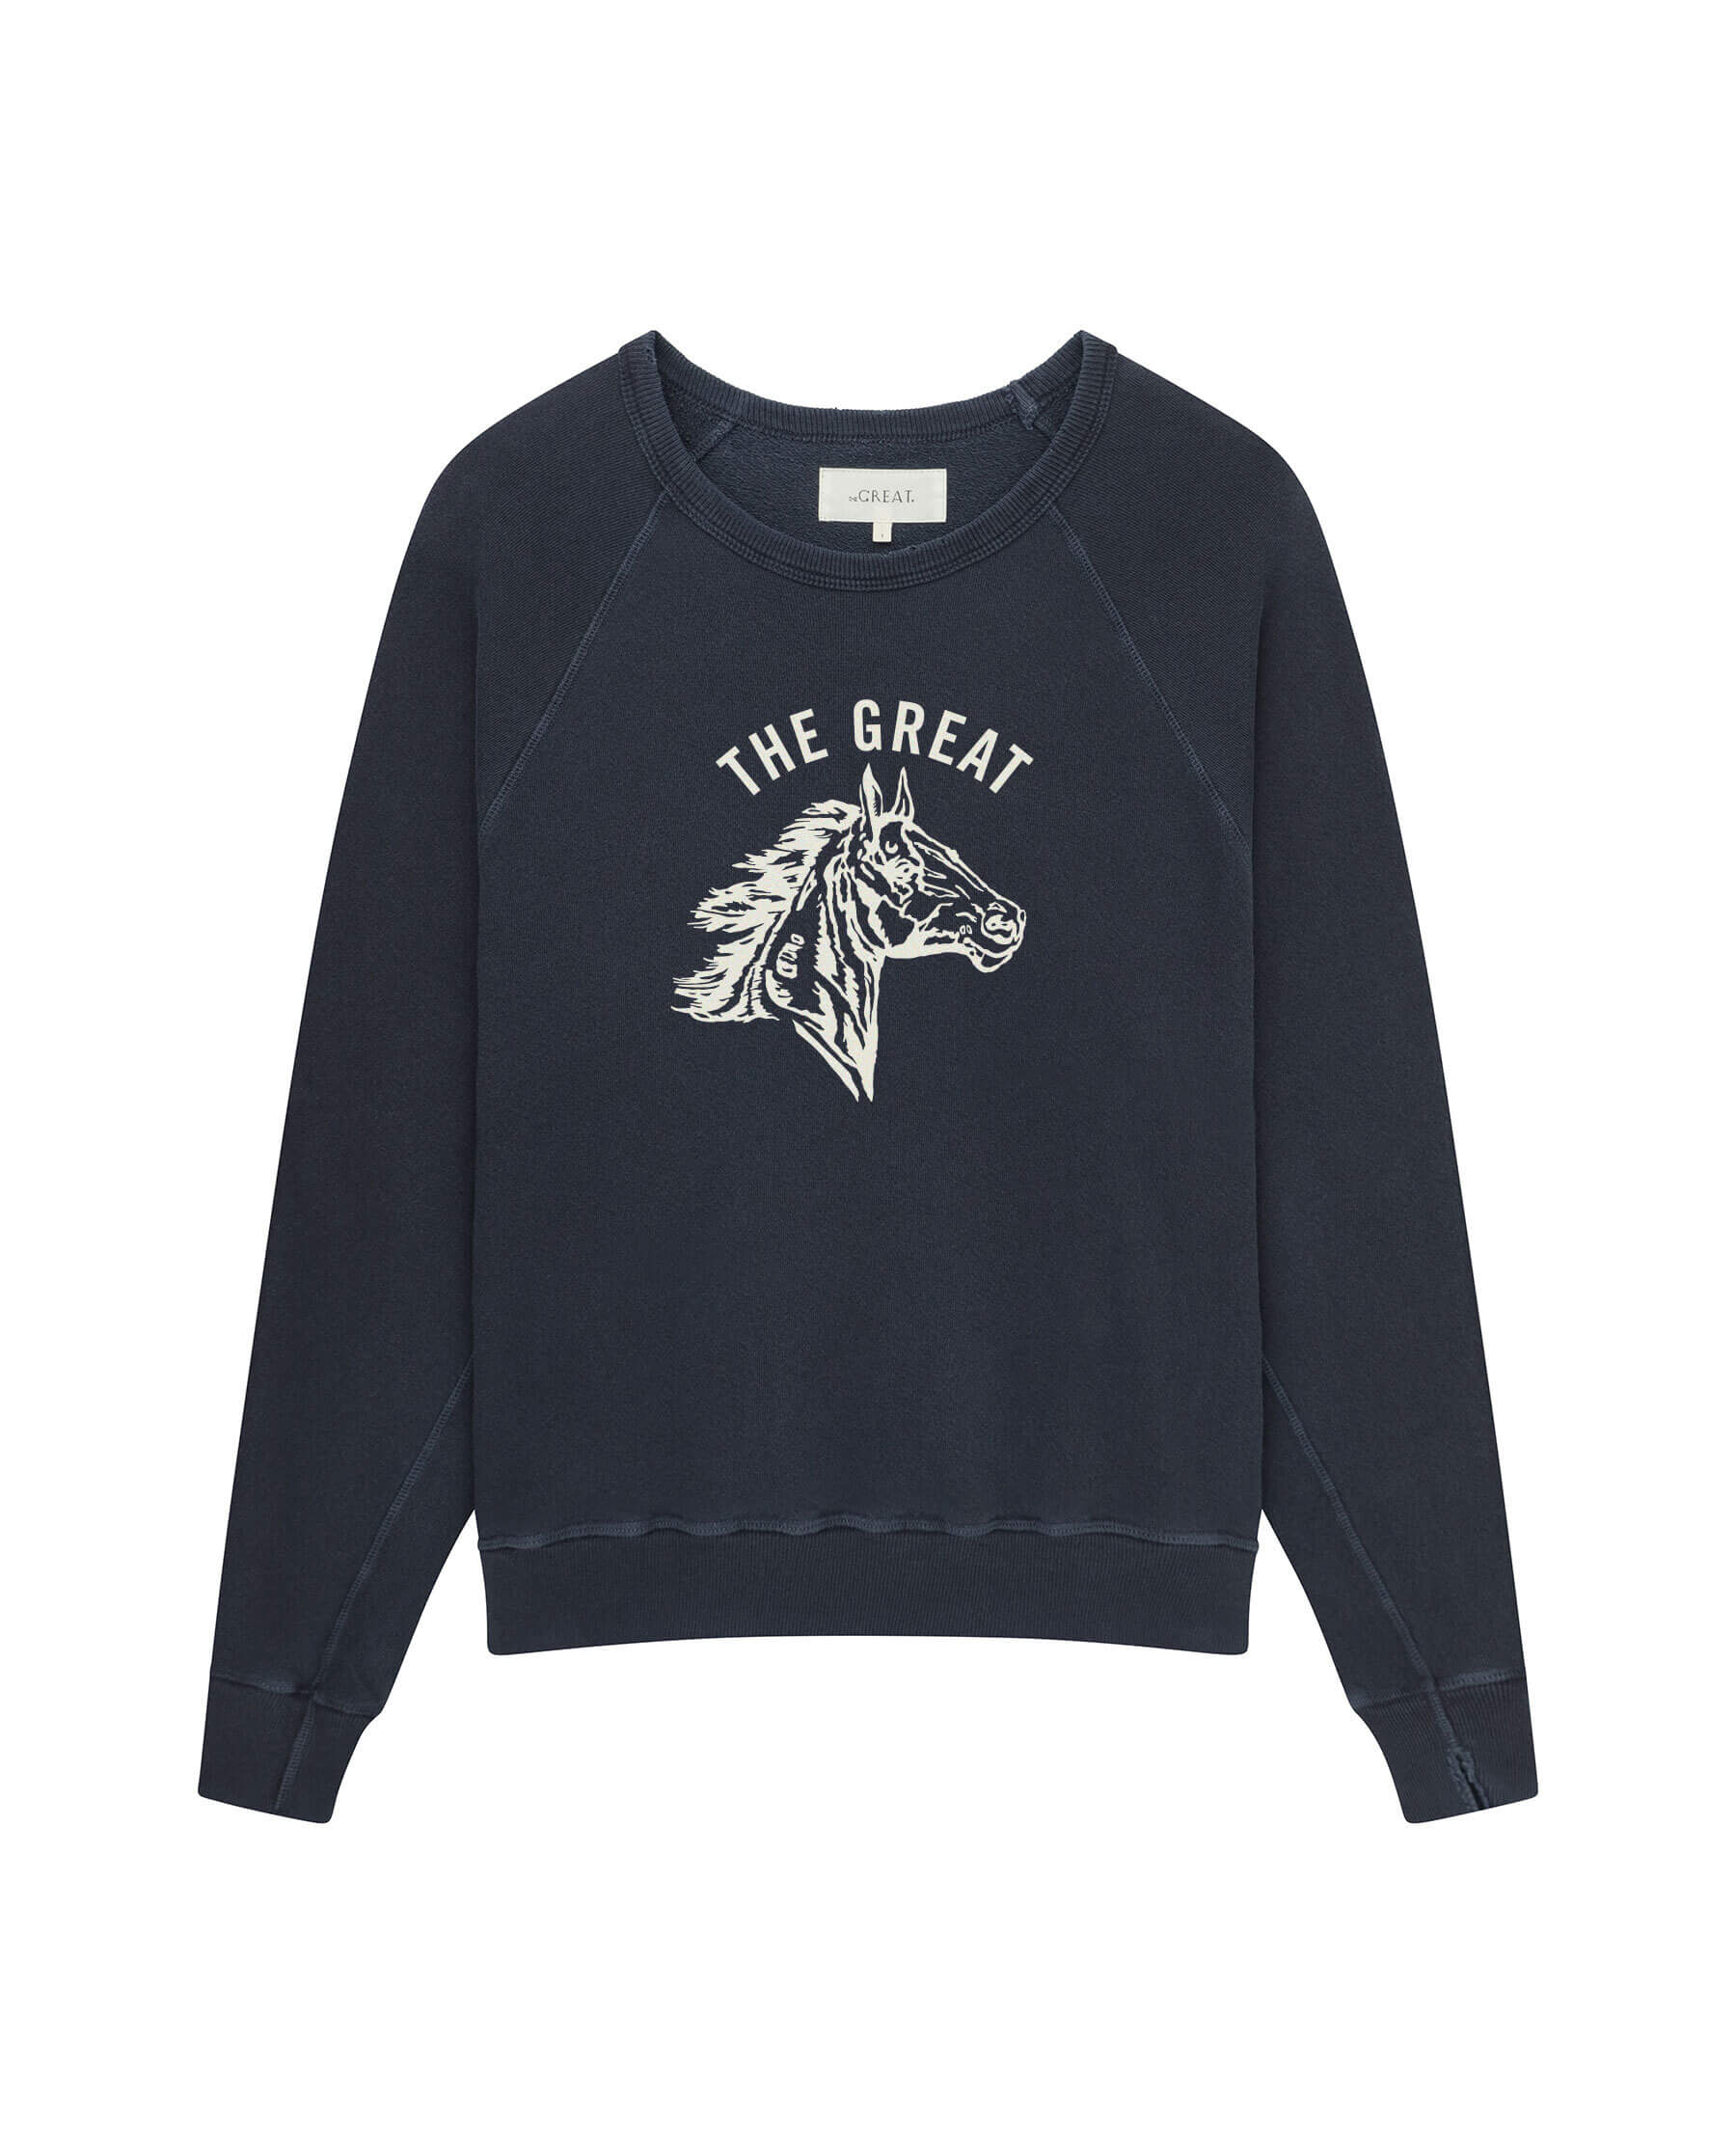 The College Sweatshirt. Graphic -- Washed Navy with Cream Bronco Graphic